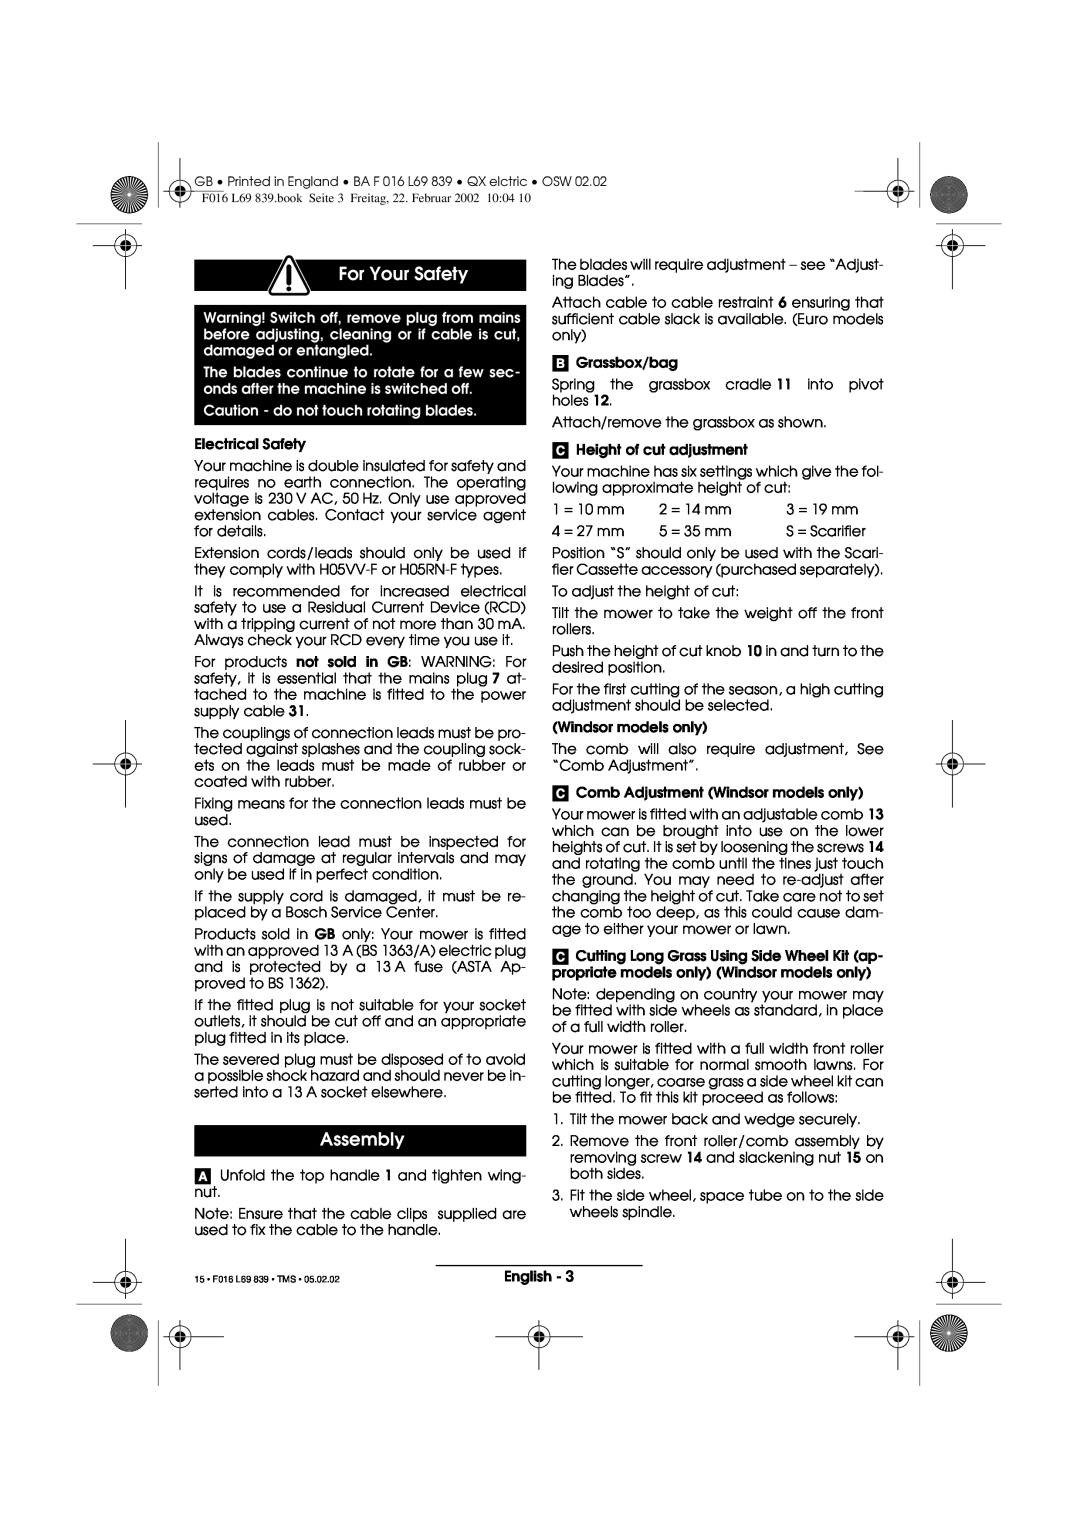 Atco QX operating instructions For Your Safety, Assembly 